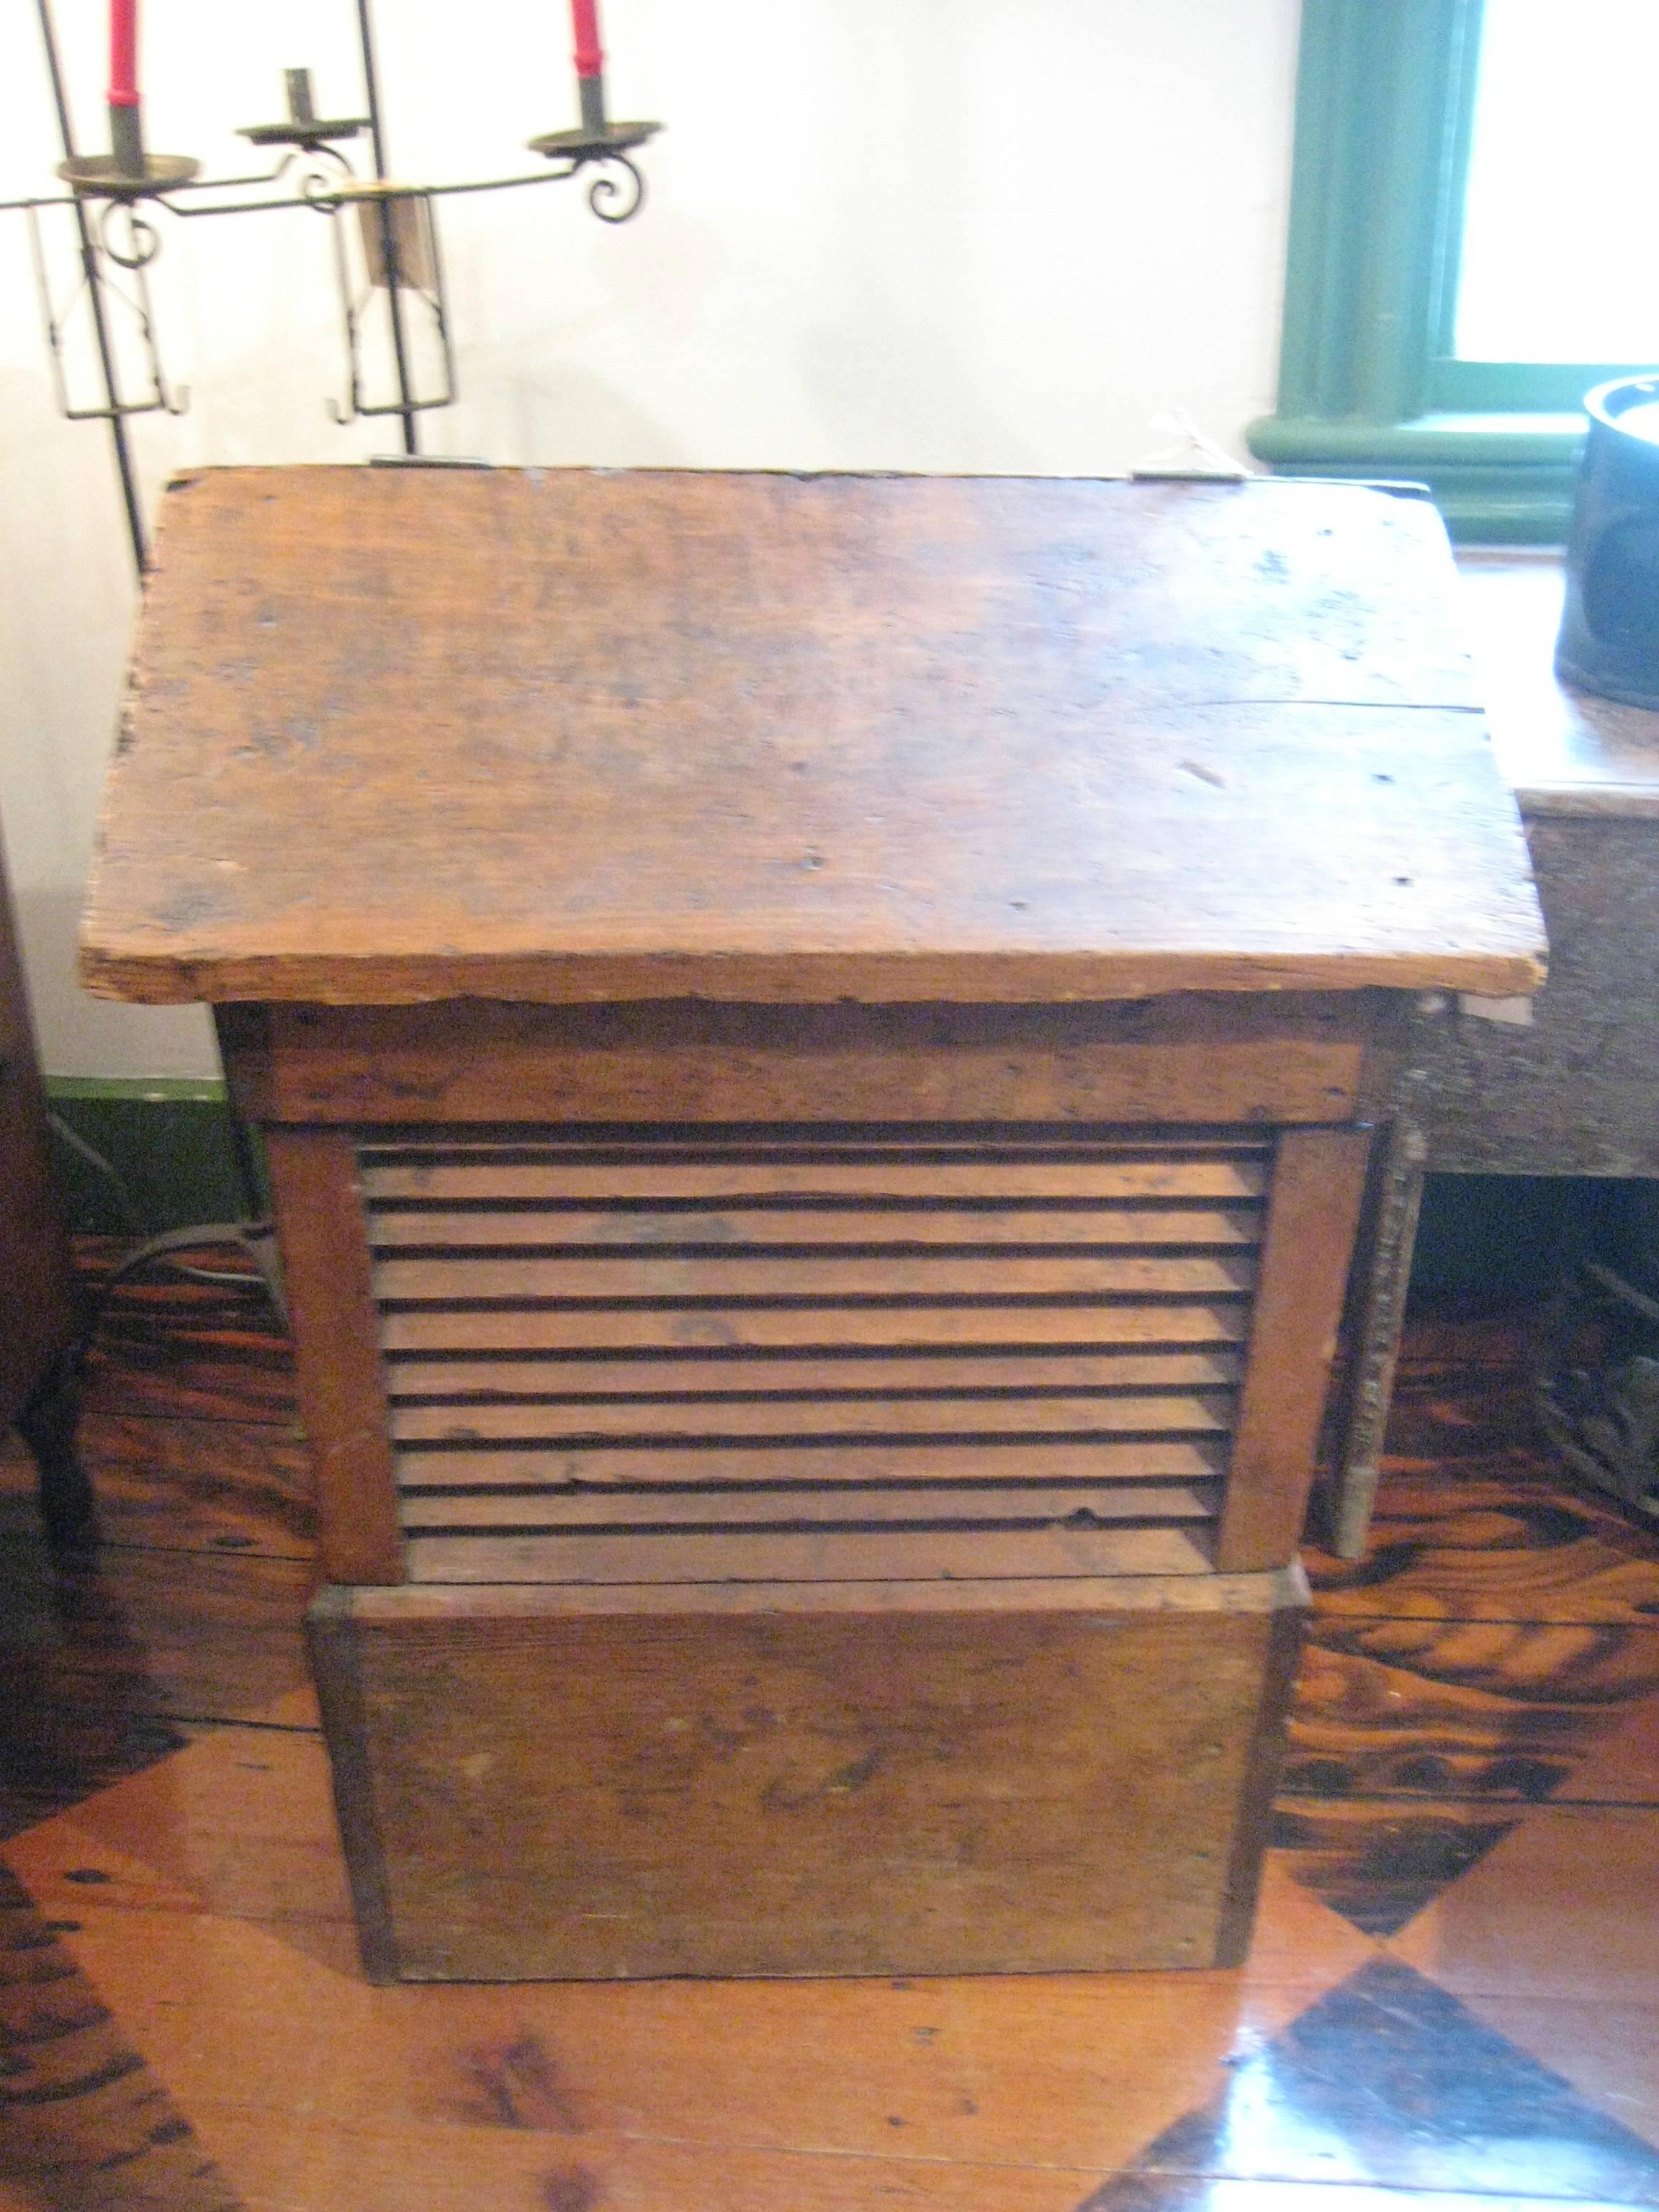 19th Century Cupola Wood or Kindling Box.  Crafted from Pine in the form of a Cupola with Louvers on all four sides and hinged lift-top for access.